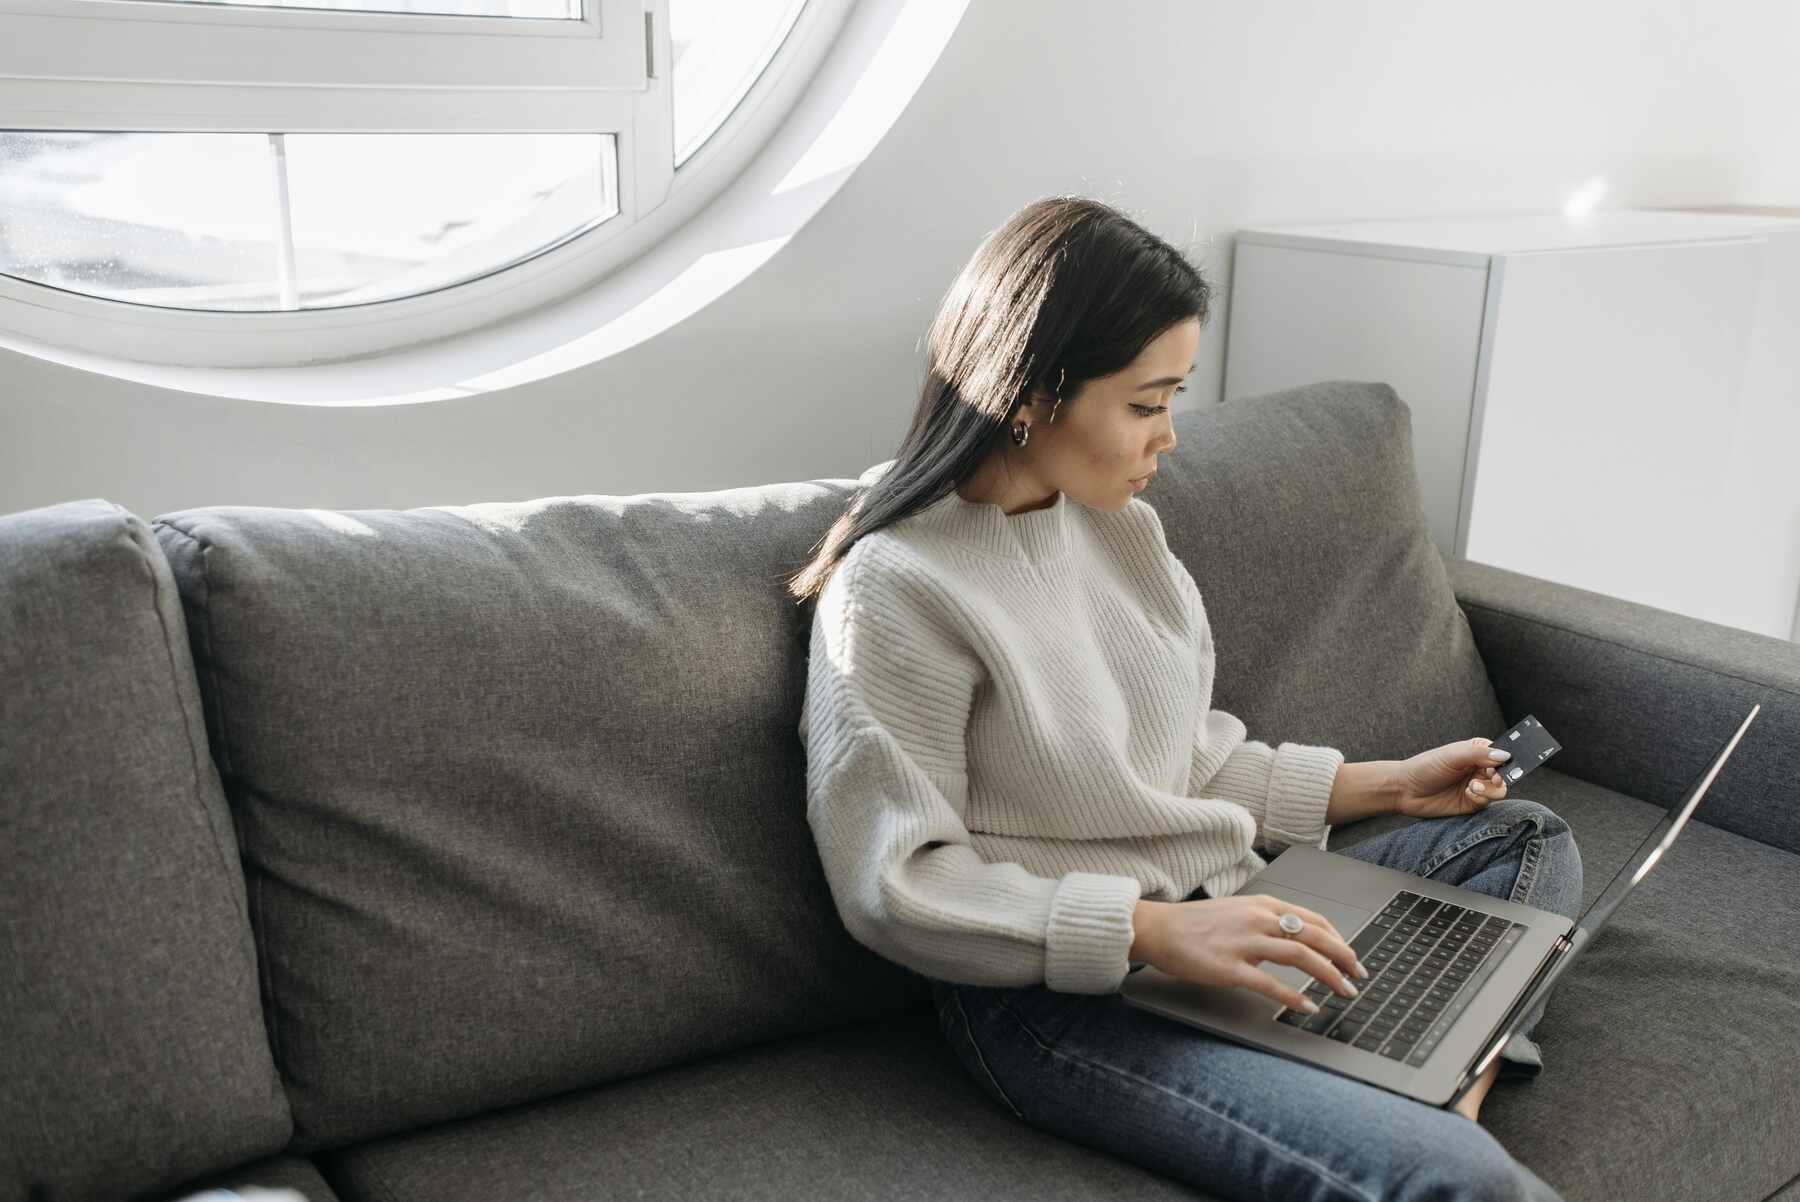 A woman sitting on a couch using her laptop and holding her credit card